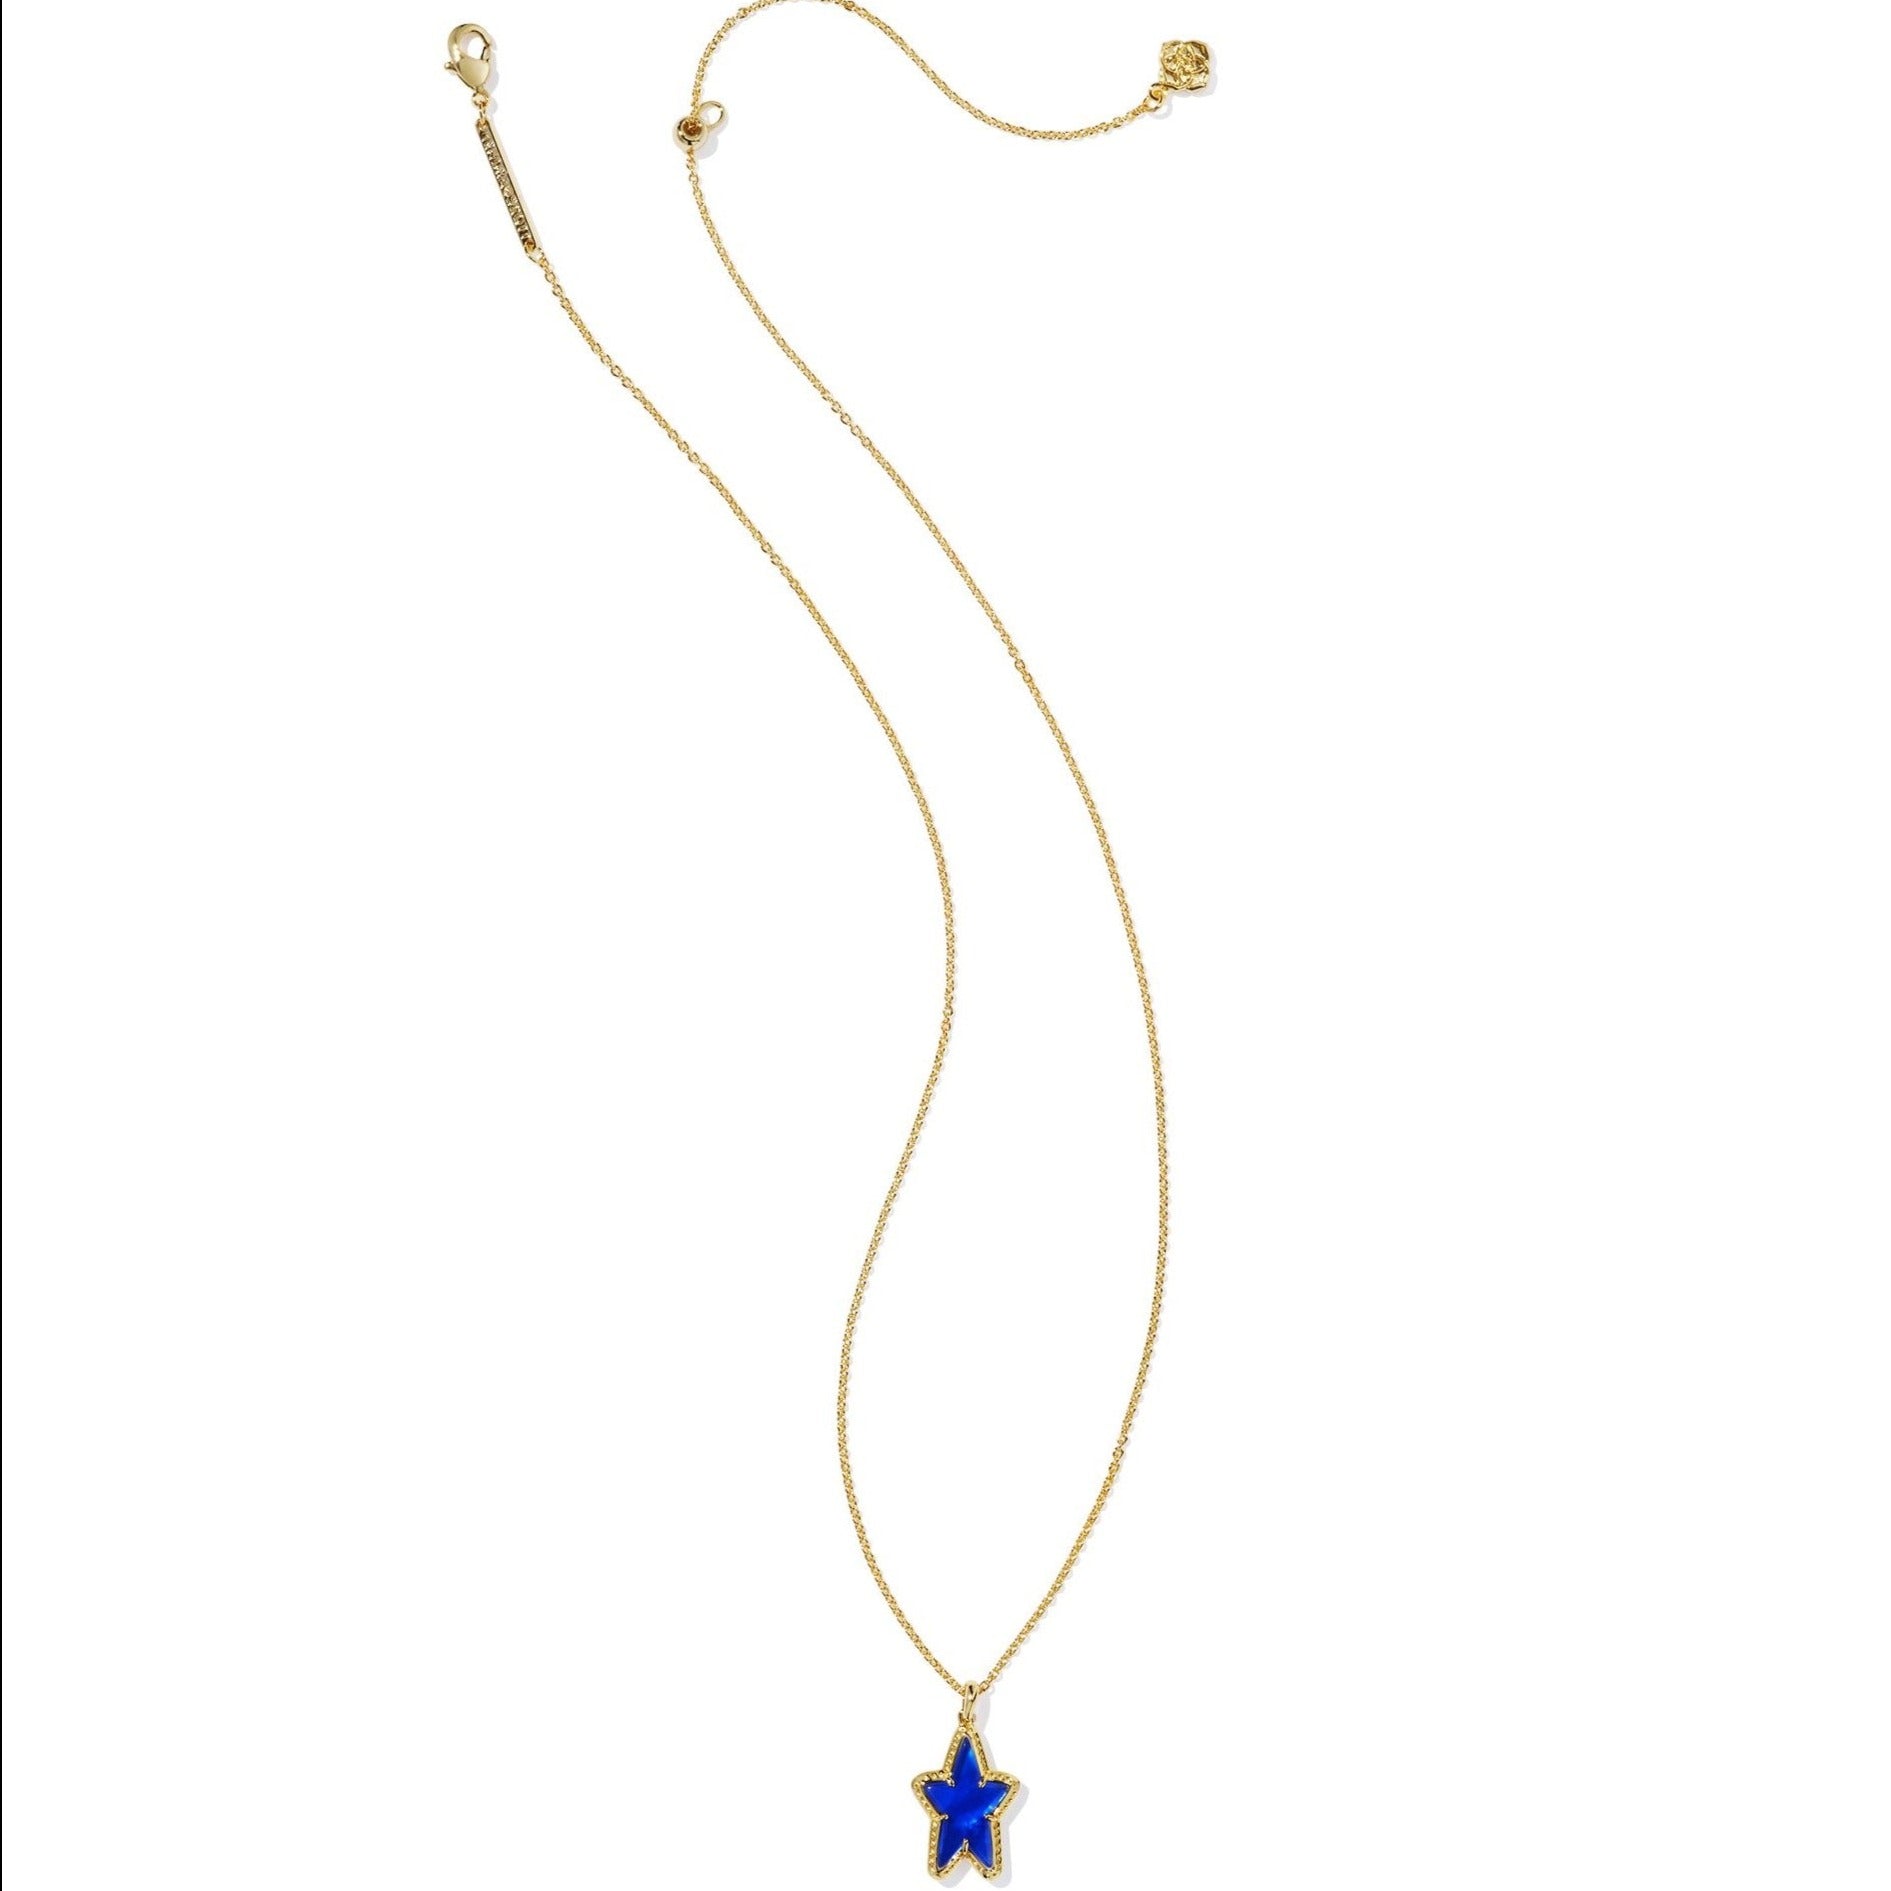 Kendra Scott | Ada Gold Star Short Pendant Necklace in Cobalt Blue Illusion - Giddy Up Glamour Boutique